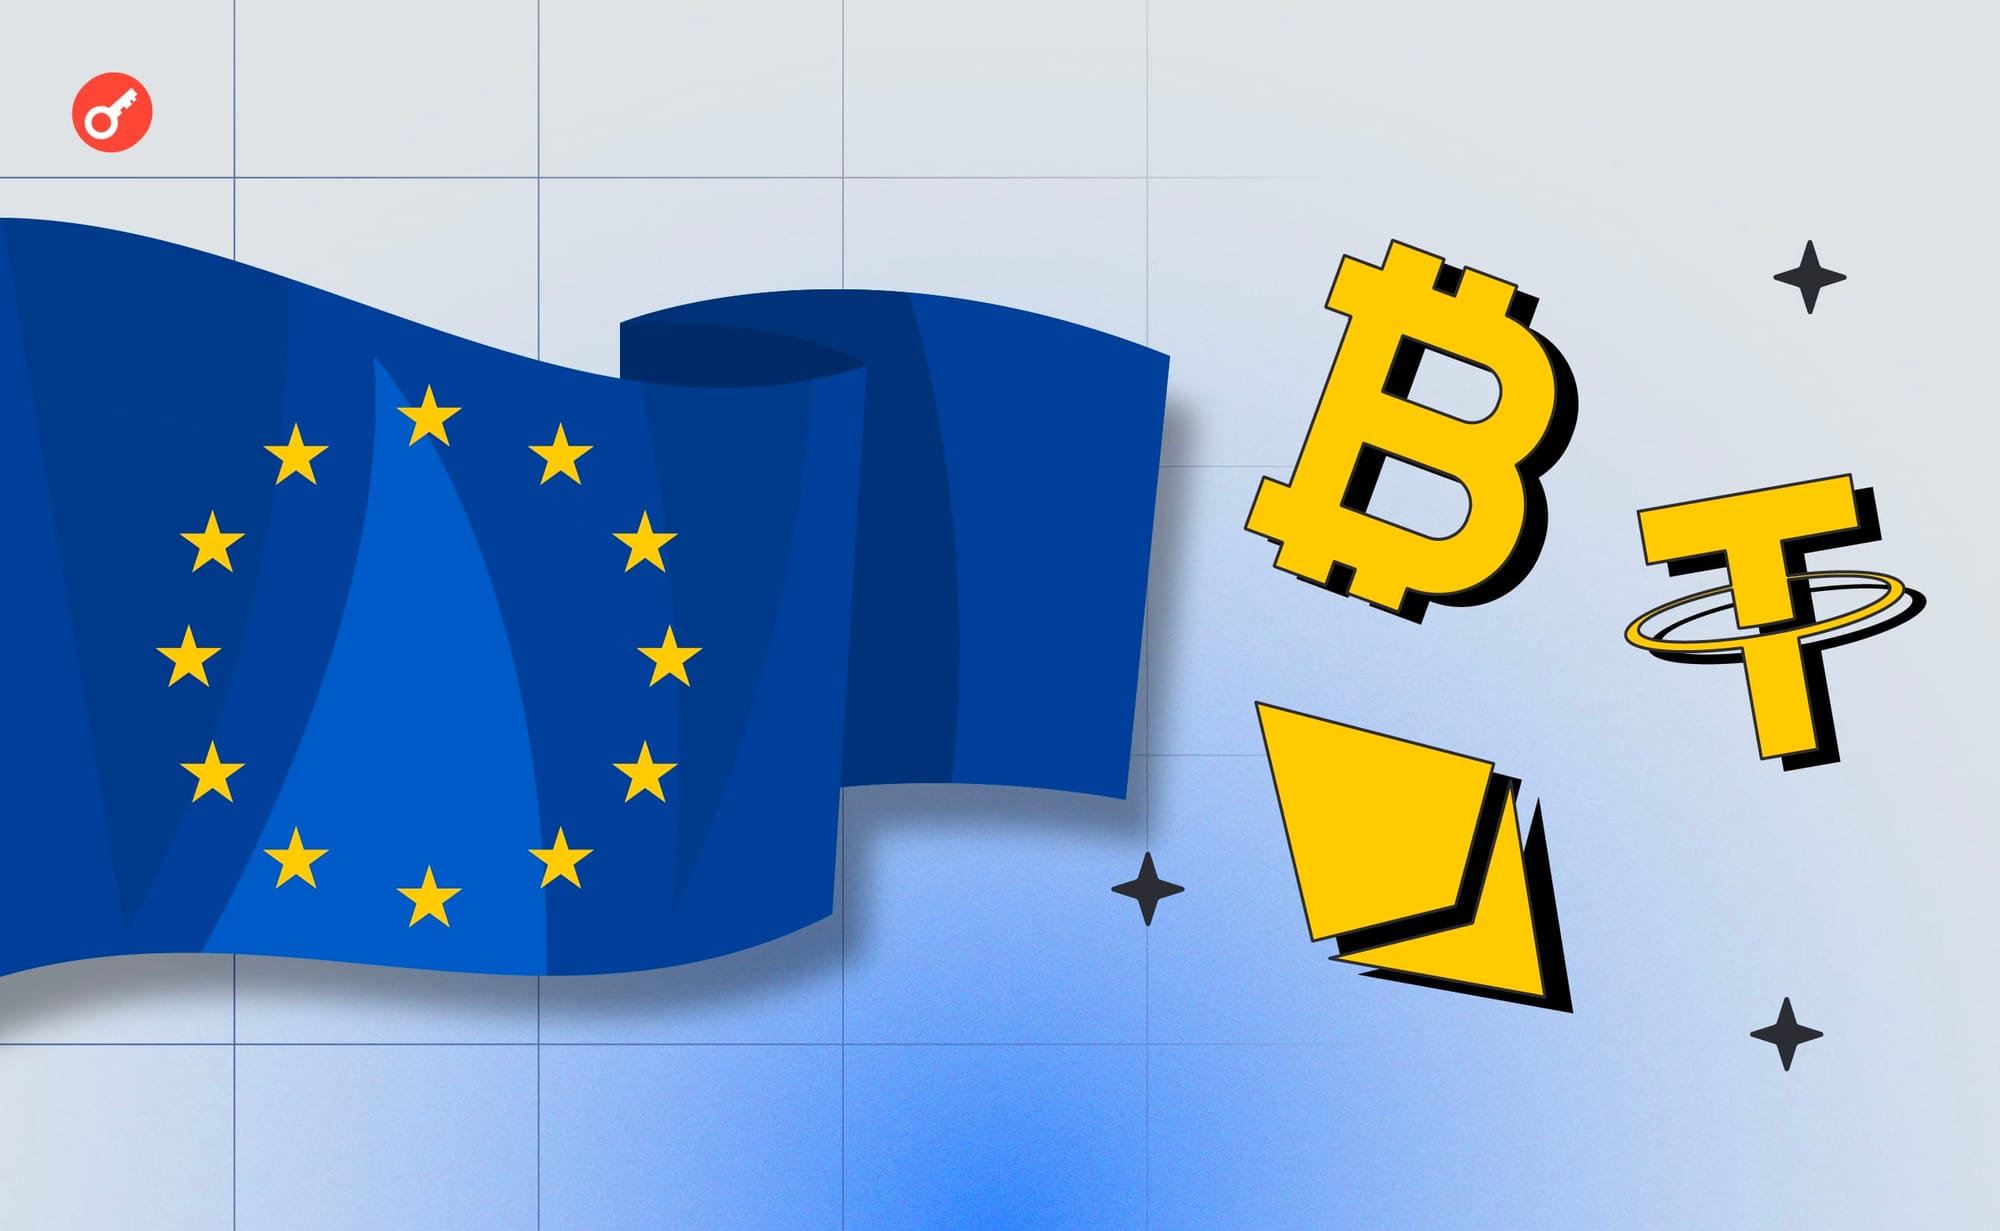 Without the restrictions of MetaMask, but with the ban of Monero: lawyers have dismantled the EU-approved AML rules